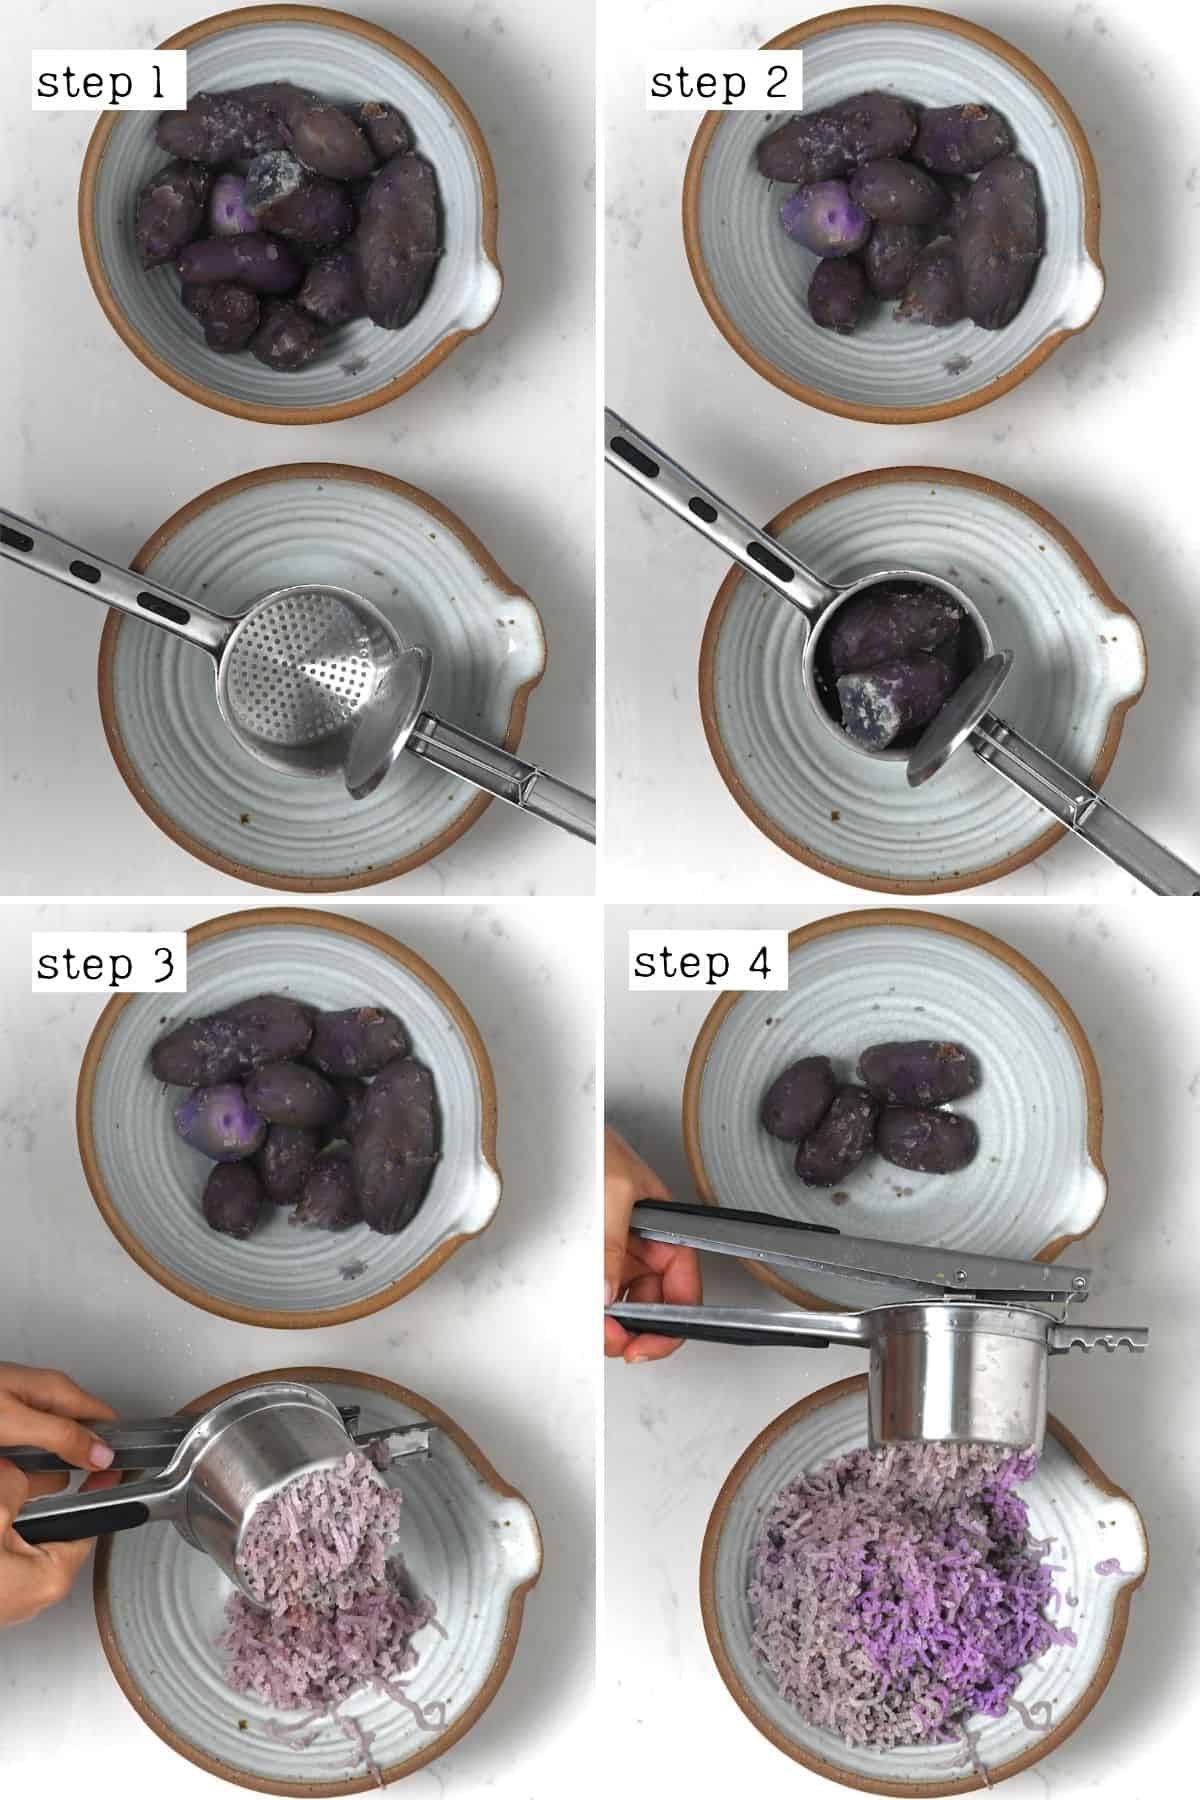 Steps for making purple mashed potatoes